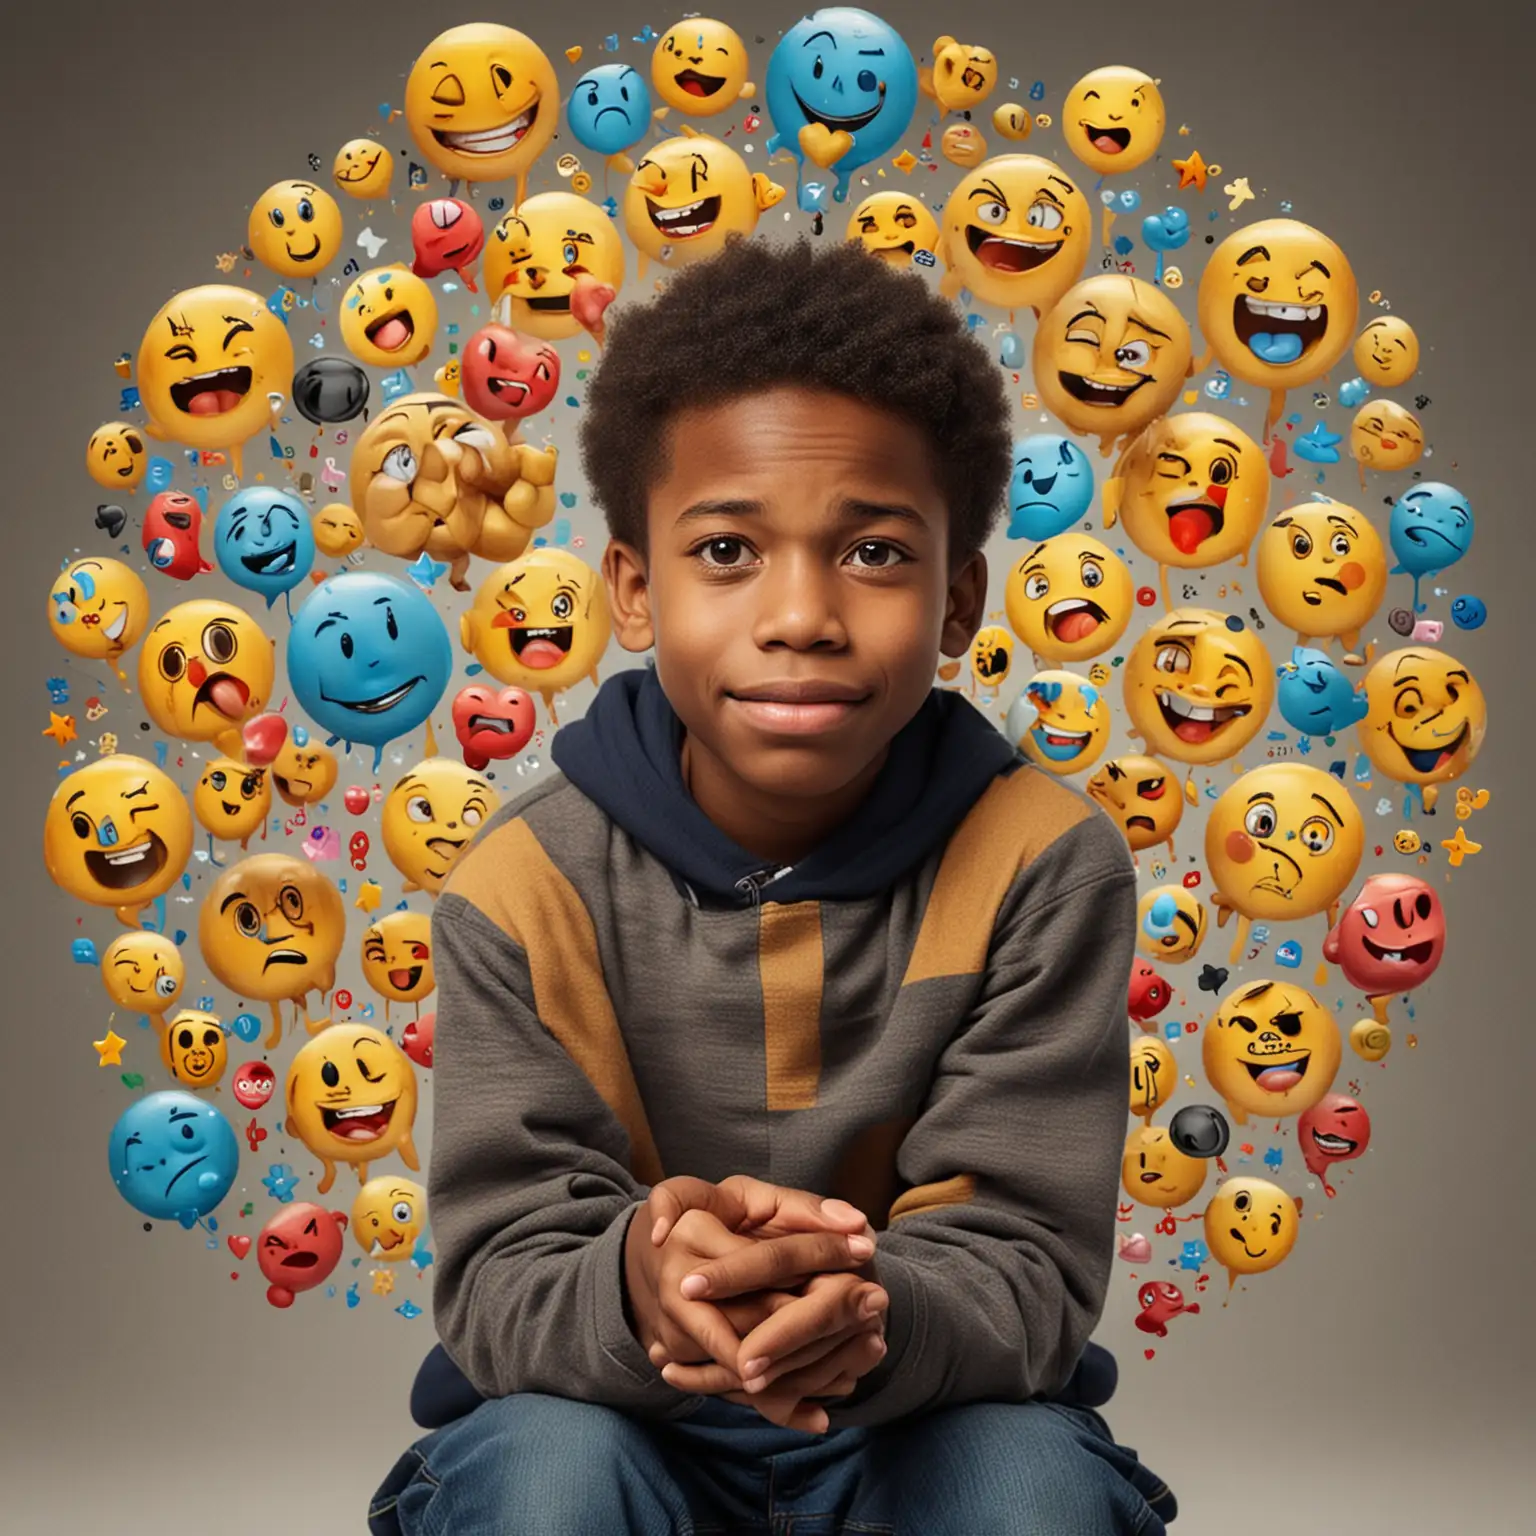 Diverse Emotions Surround Young Black Boy Expressive Situations